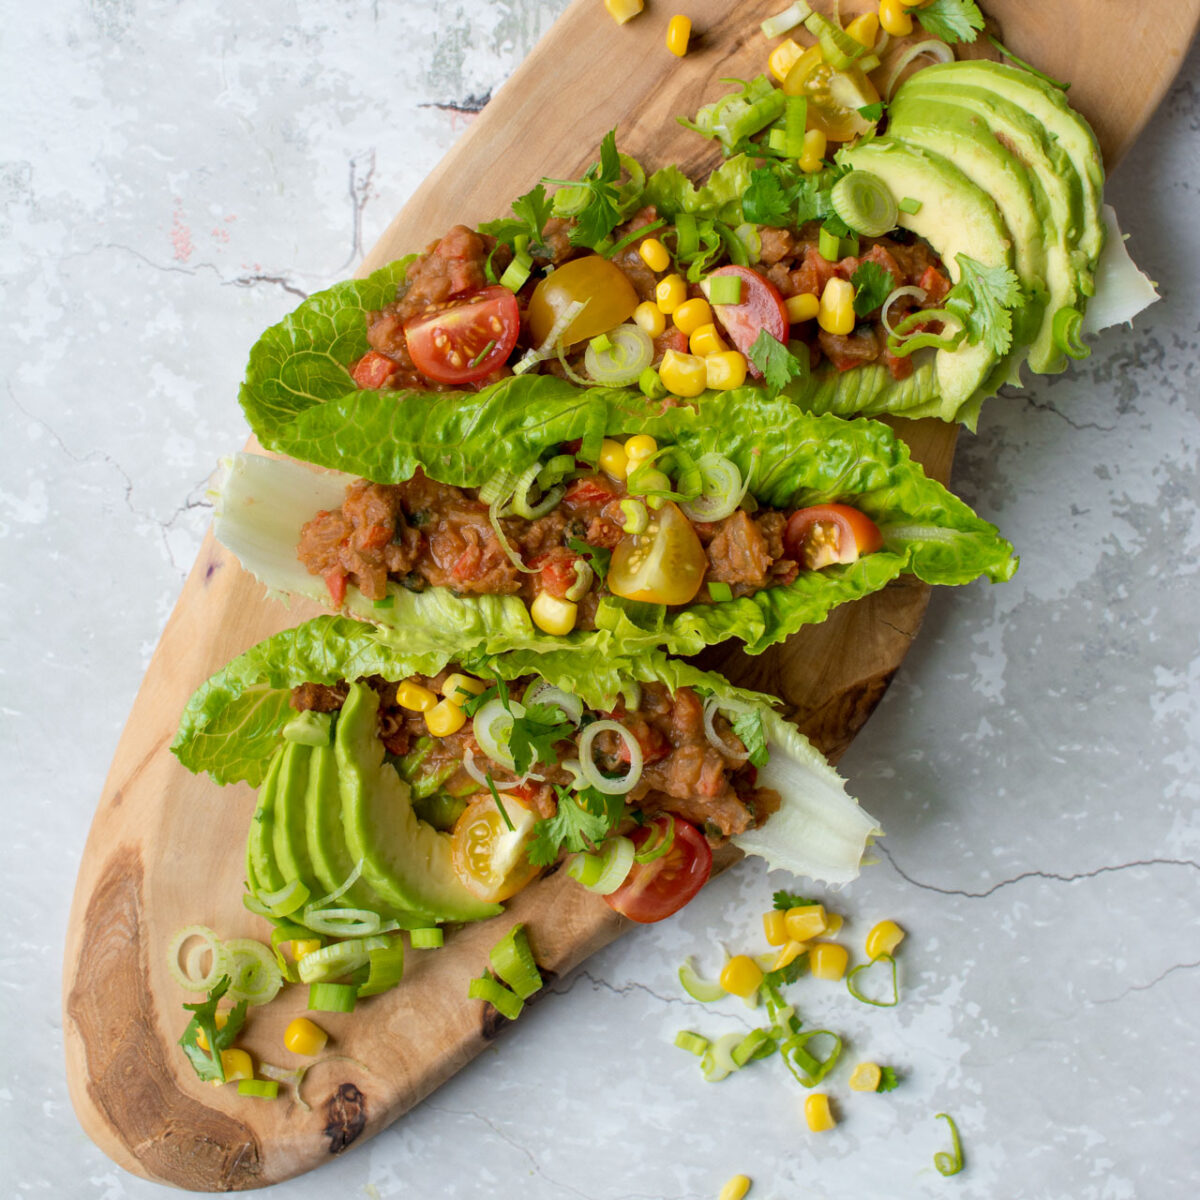 Refried Bean Lettuce wraps, perfect for a vegan lunch on the go, or just a lighter dinner option! Get this super easy recipe here!